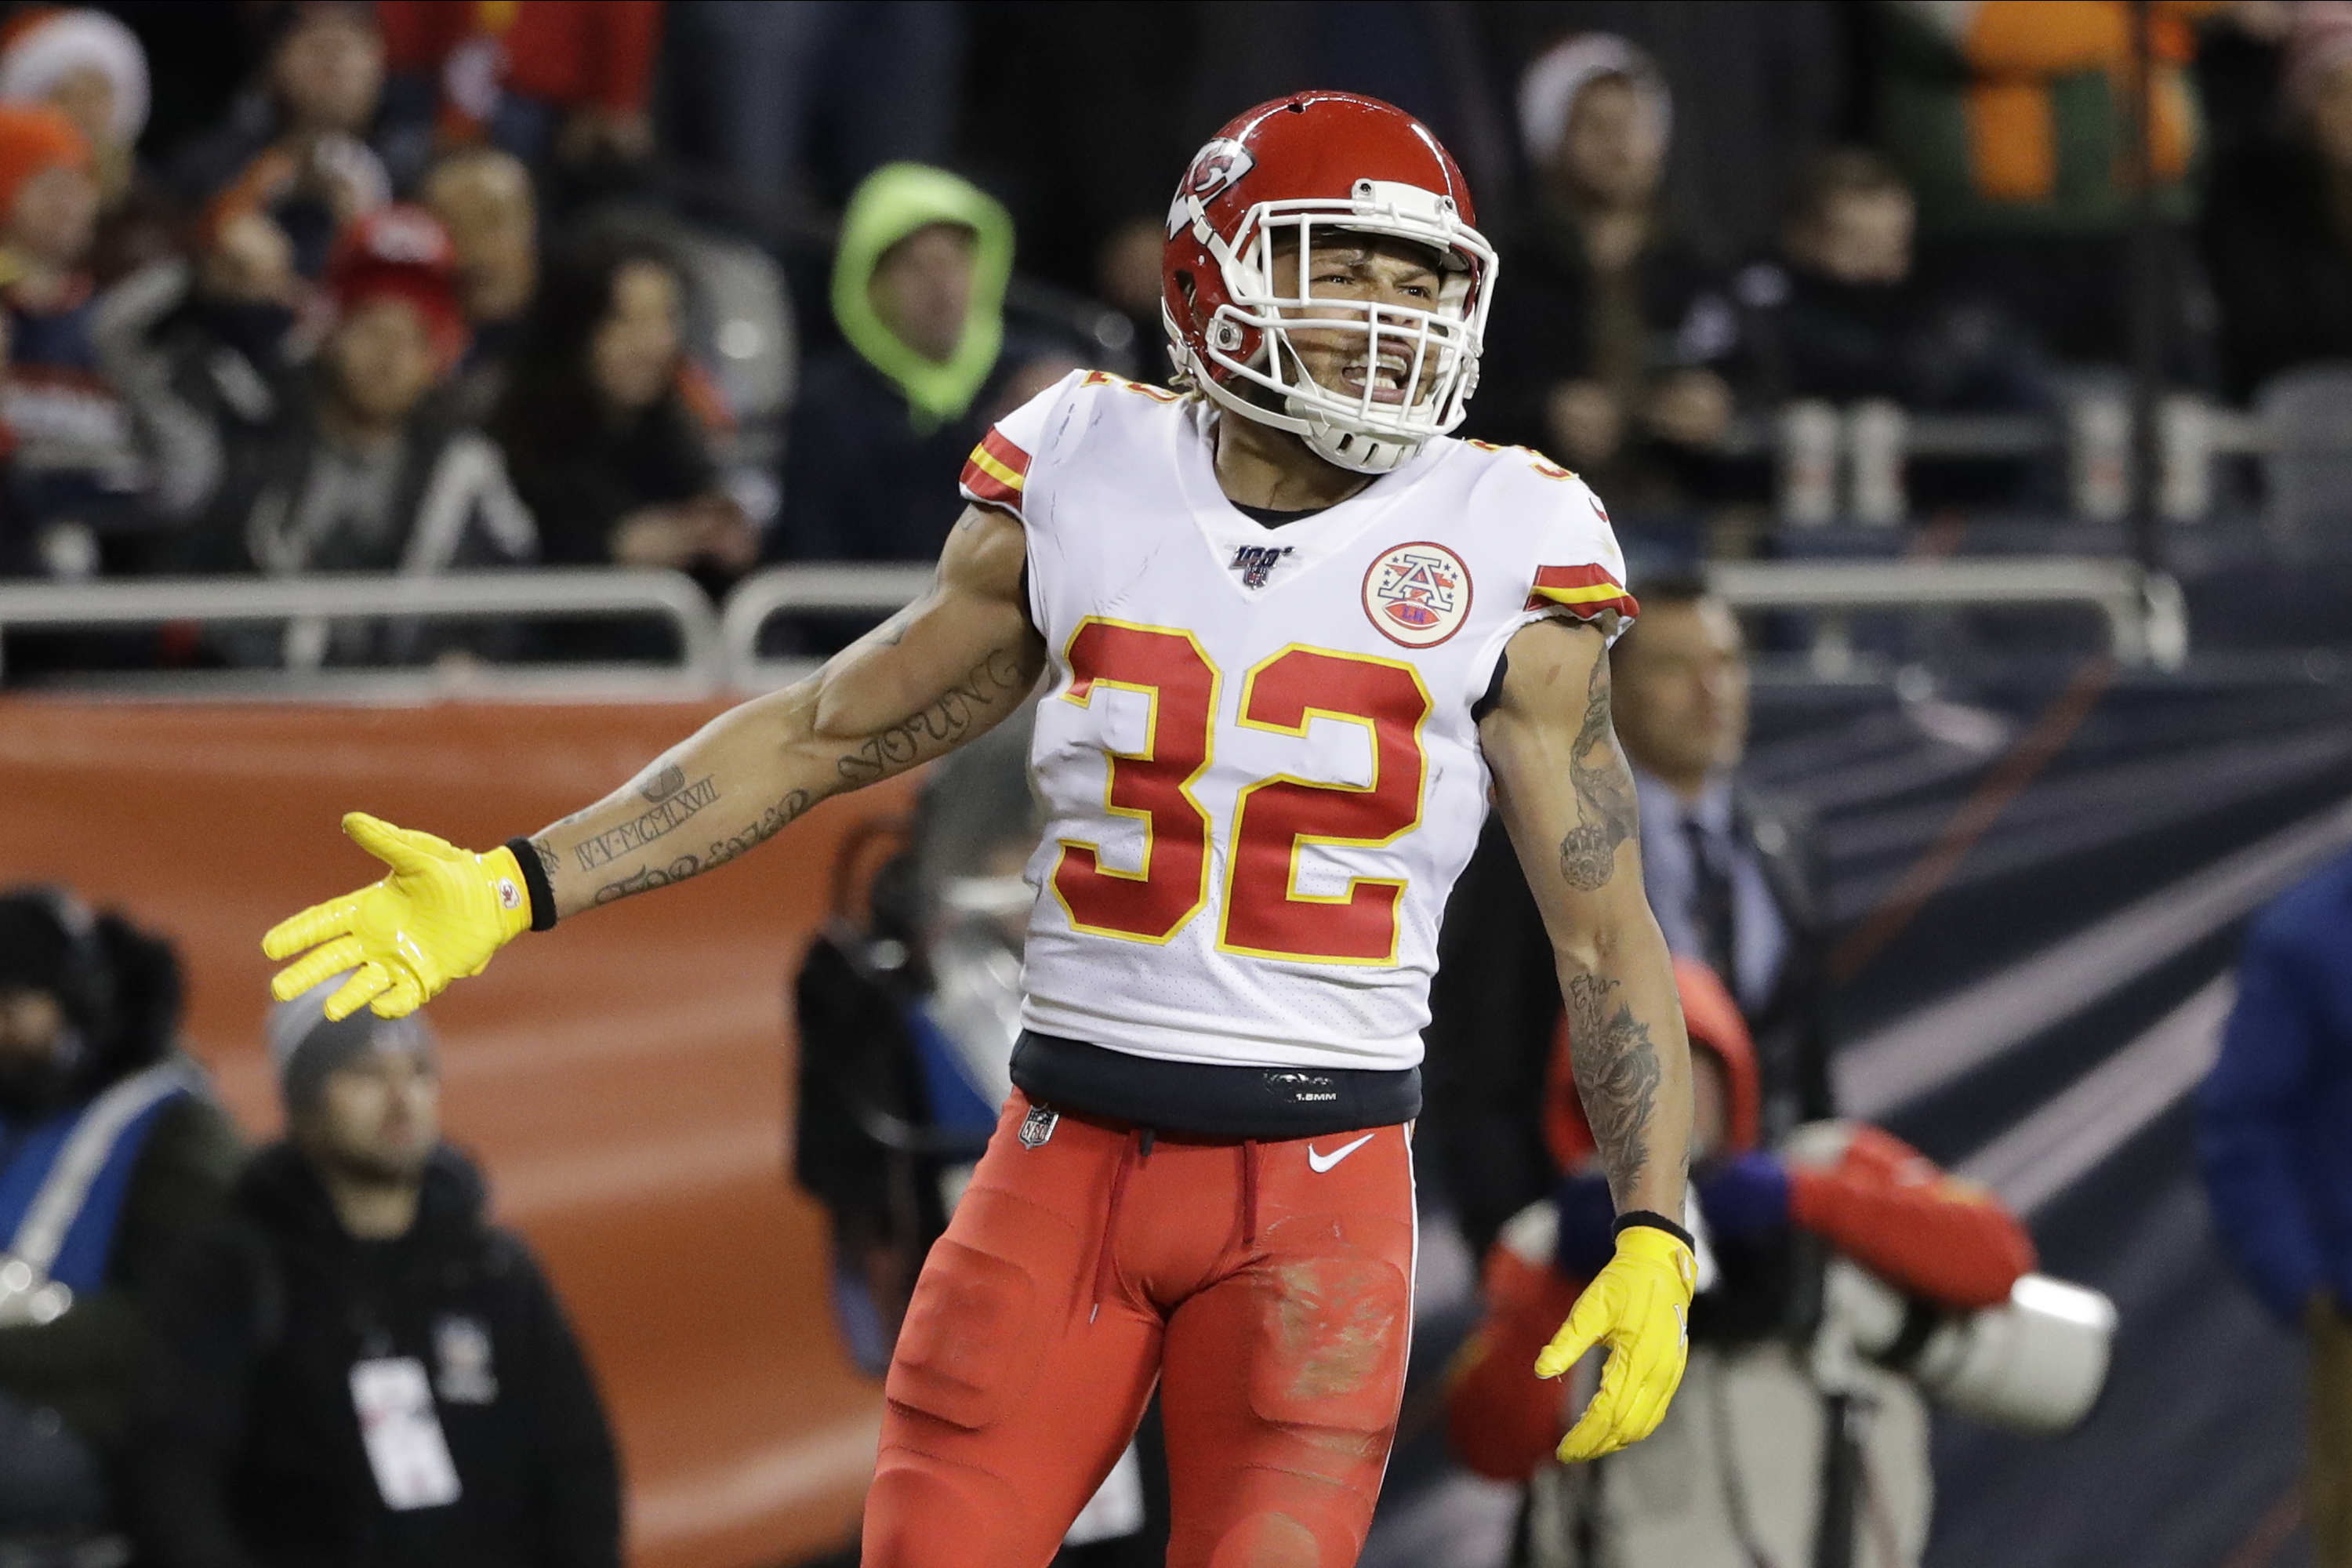 Mathieu leads several Chiefs chose for NFL's All-Pro teams